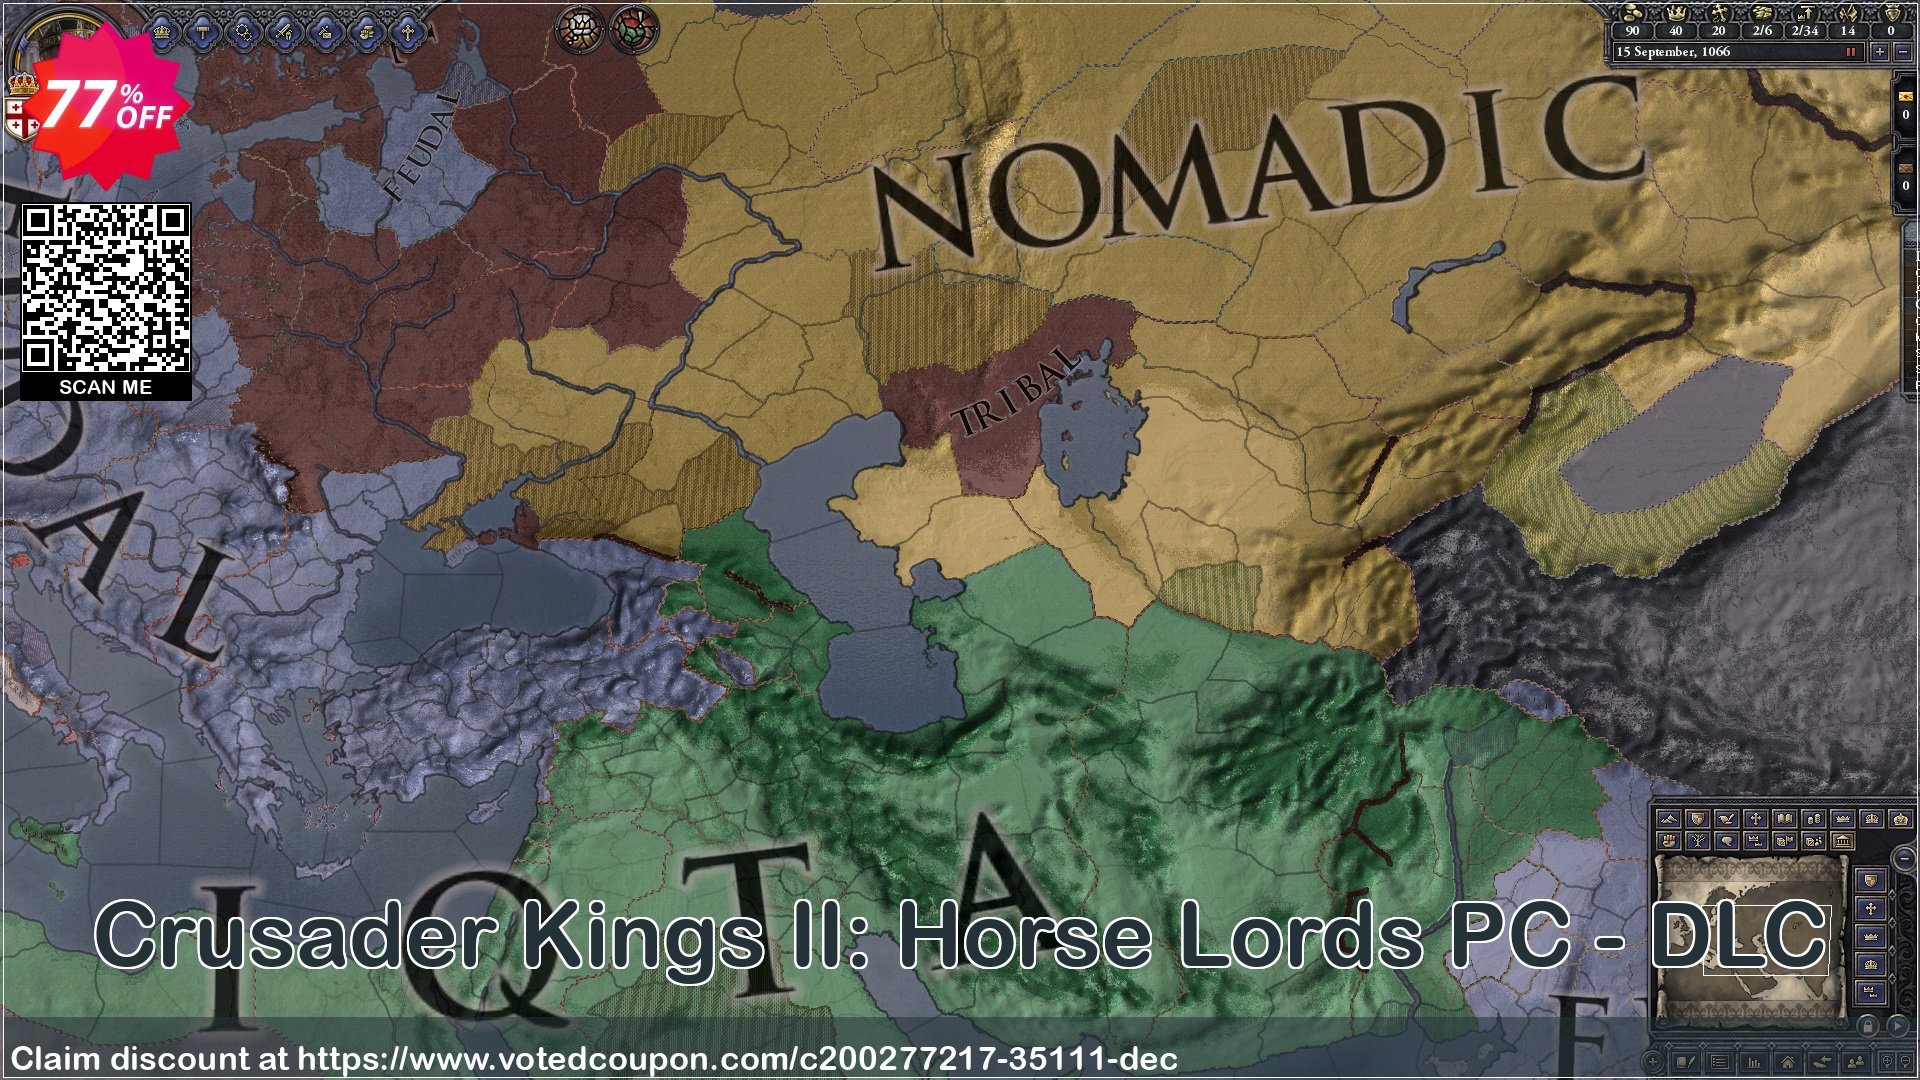 Crusader Kings II: Horse Lords PC - DLC Coupon Code May 2024, 77% OFF - VotedCoupon